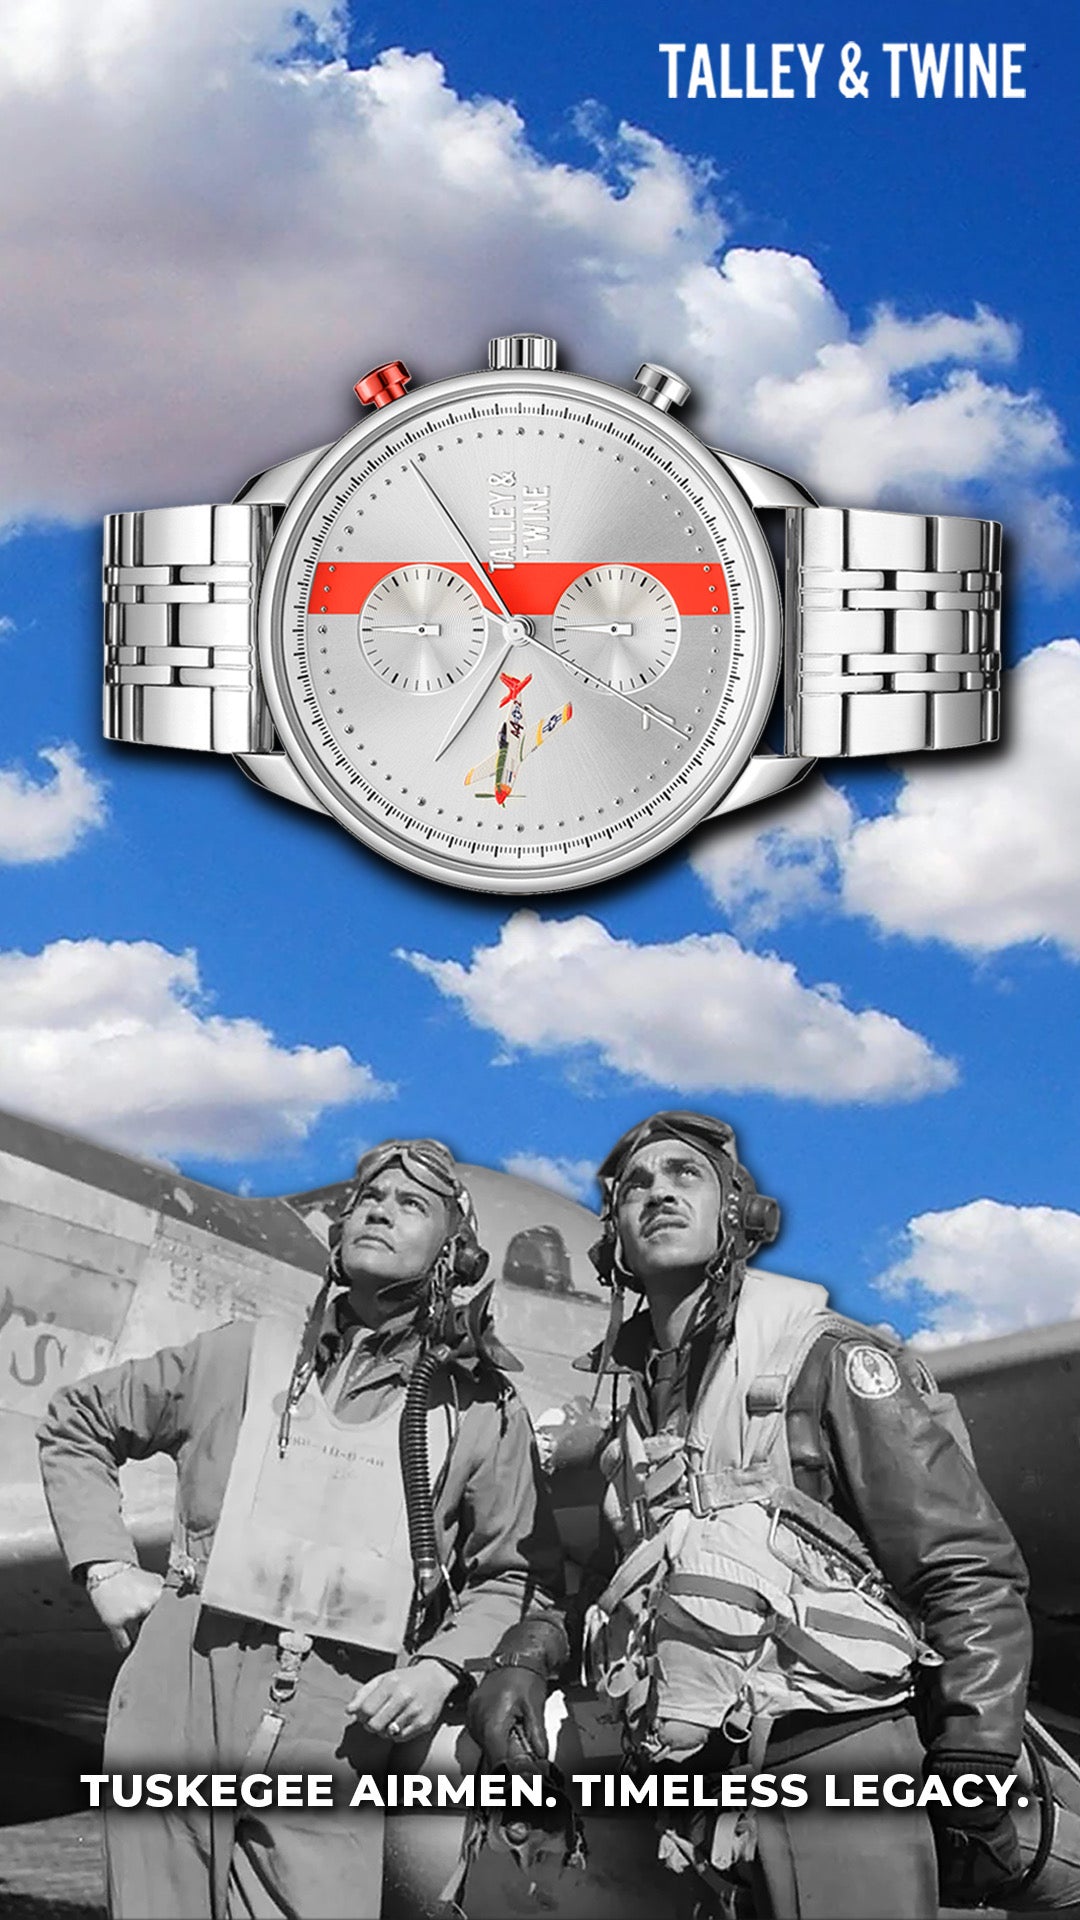 *PRE-ORDER ONLY! SHIPS BY MAY 6TH* Tuskegee Airmen "Redtails V1"